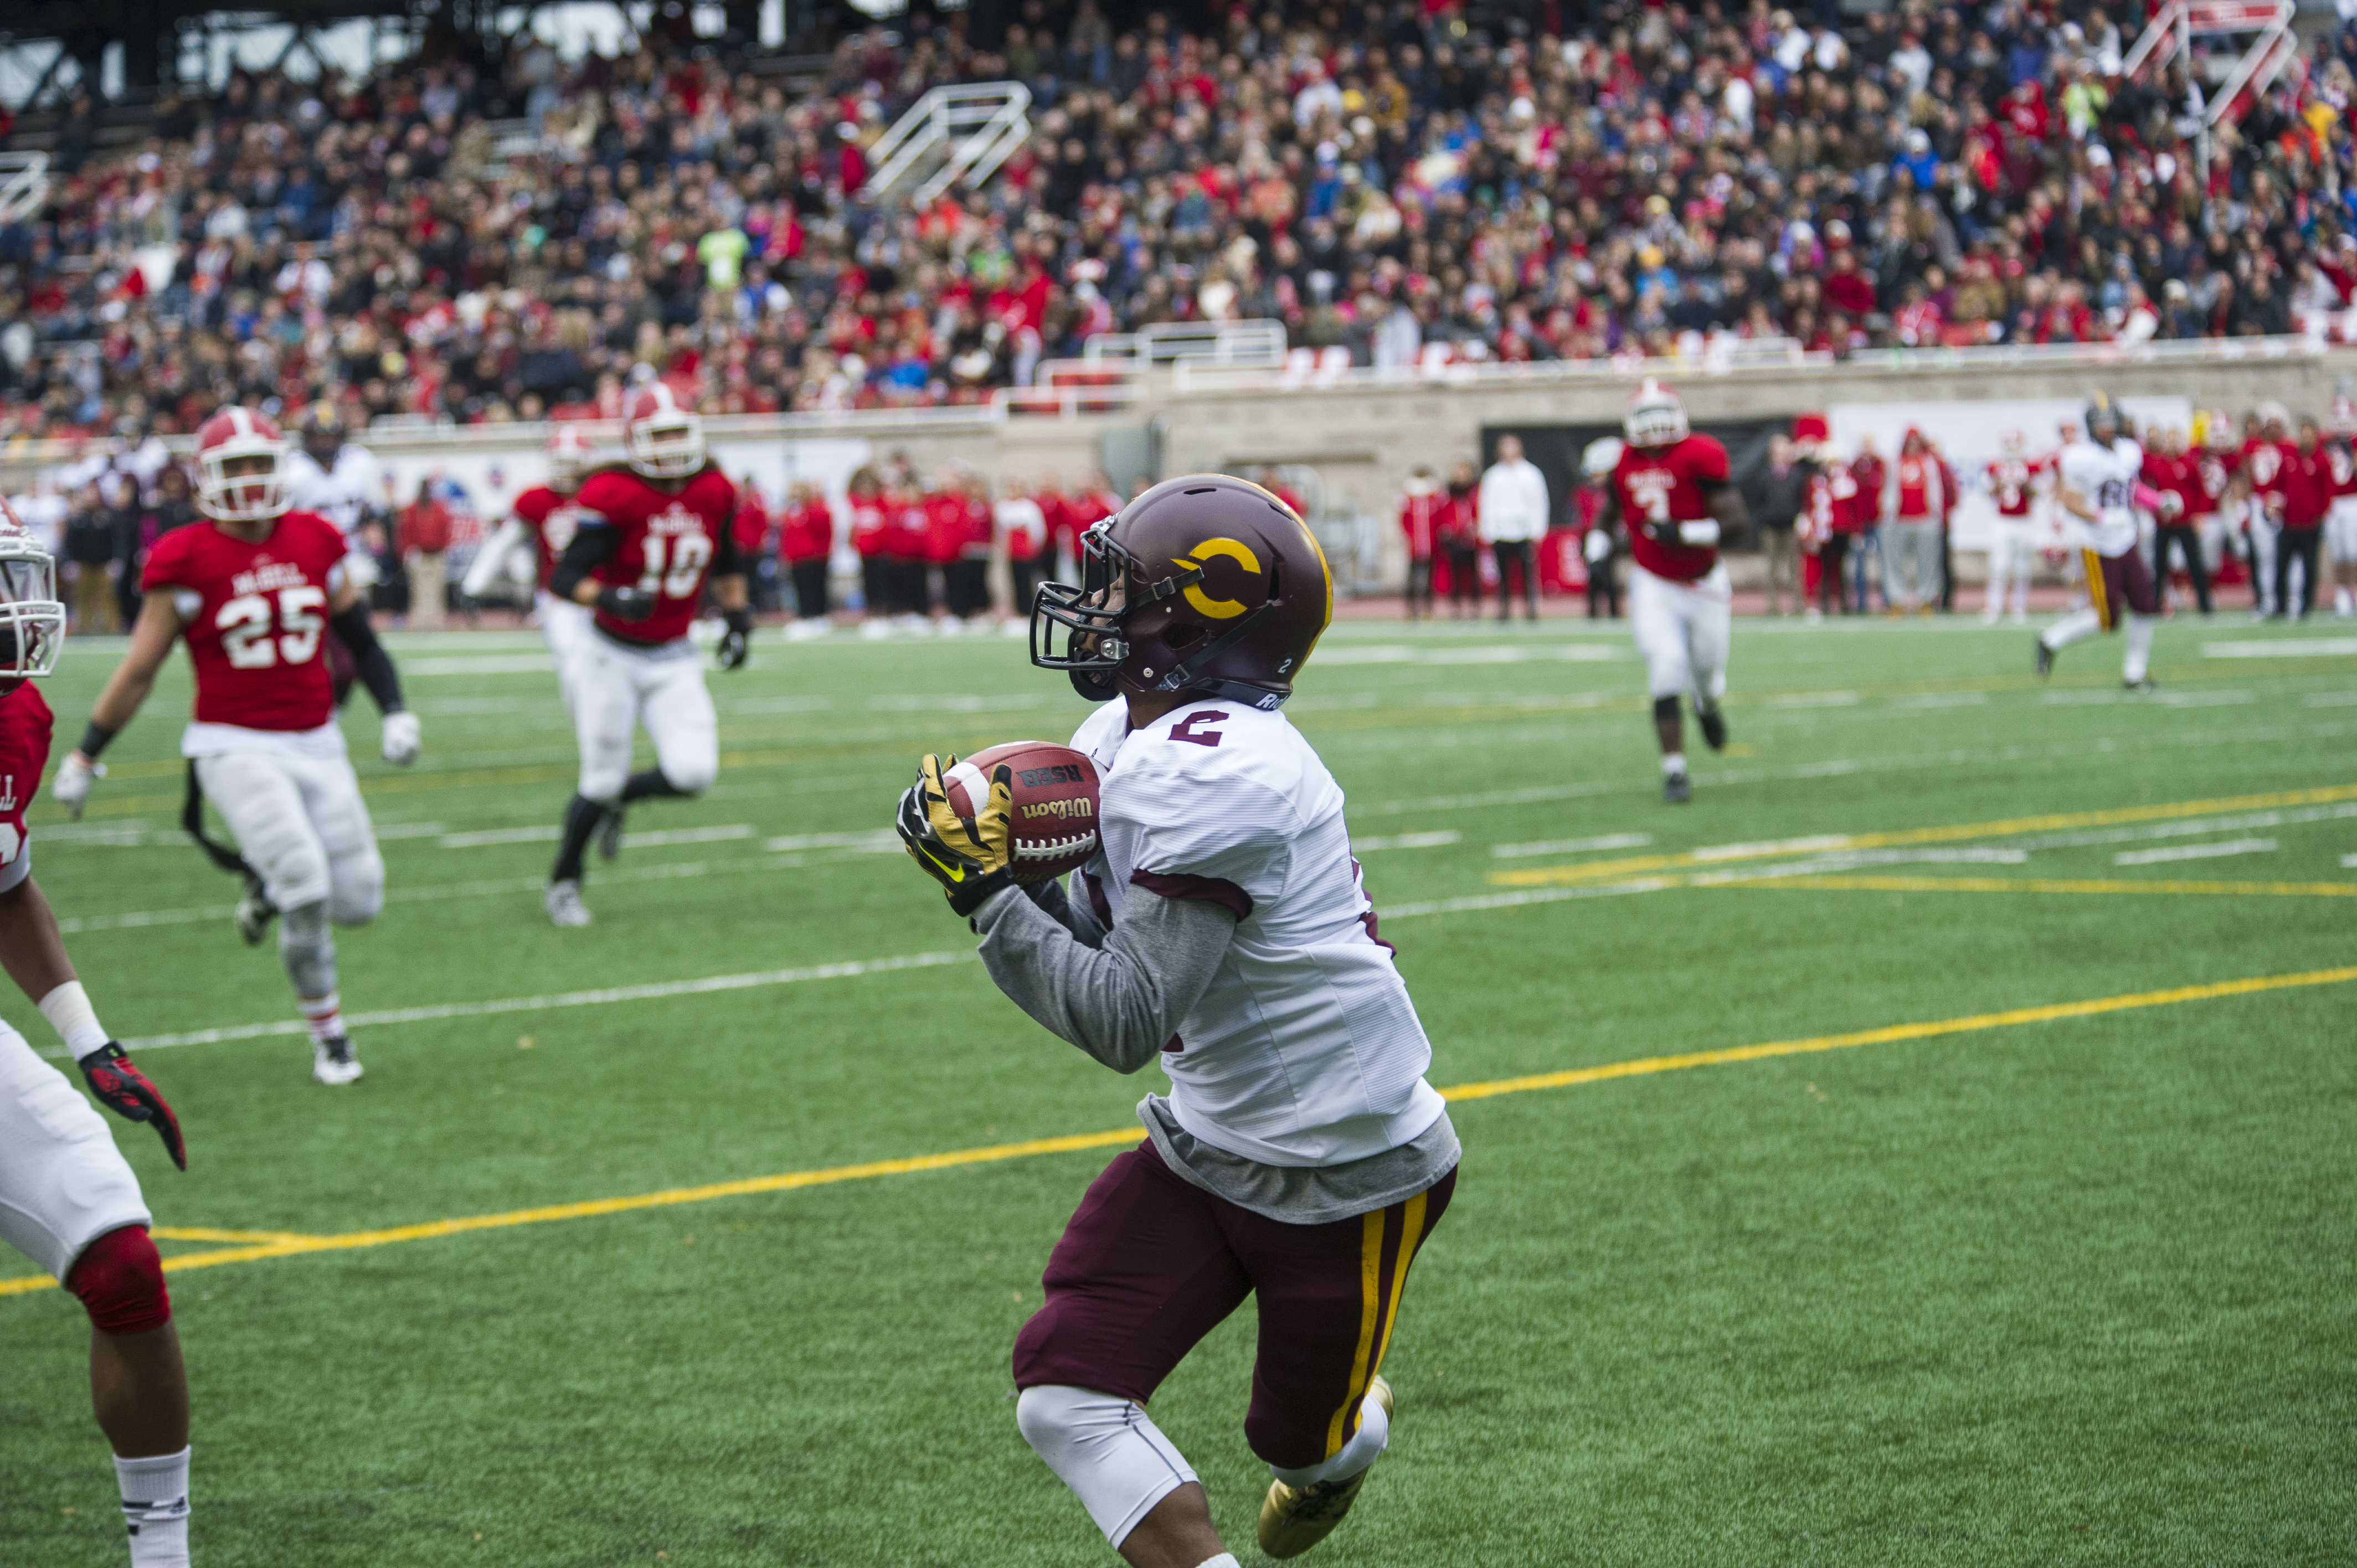 Justin Julien catches a pass from Quarterback Trenton Miller. Photo by Andrej Ivanov.